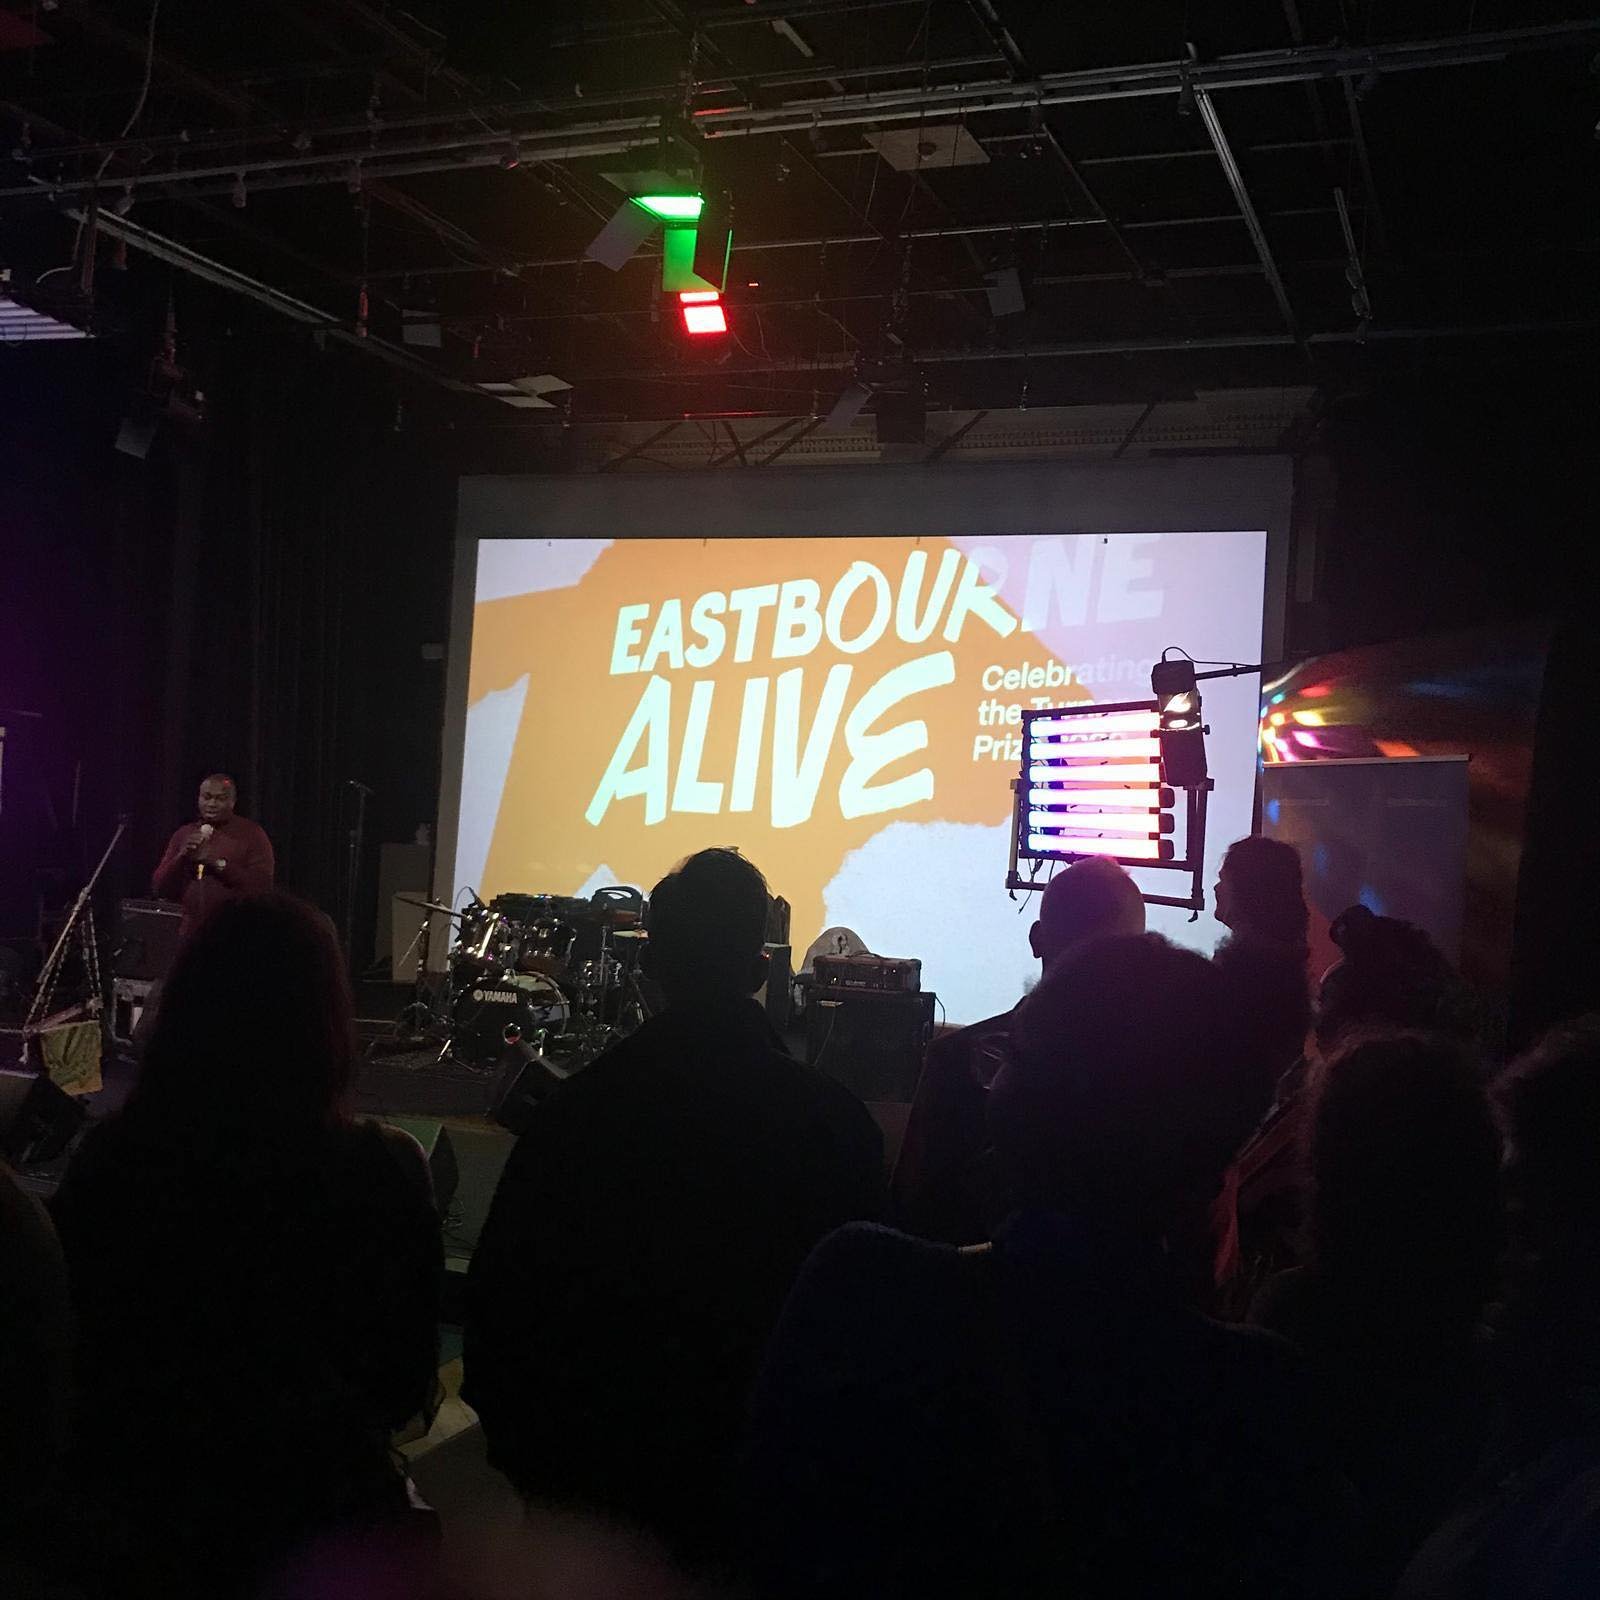 Thank you @eastbournealive and @townergallery for hosting such a brilliant closing party on Saturday night. The live music was amazing, what an incredible band! 

Thanks also for inviting me to be part of such an amazing group of artists delivering c